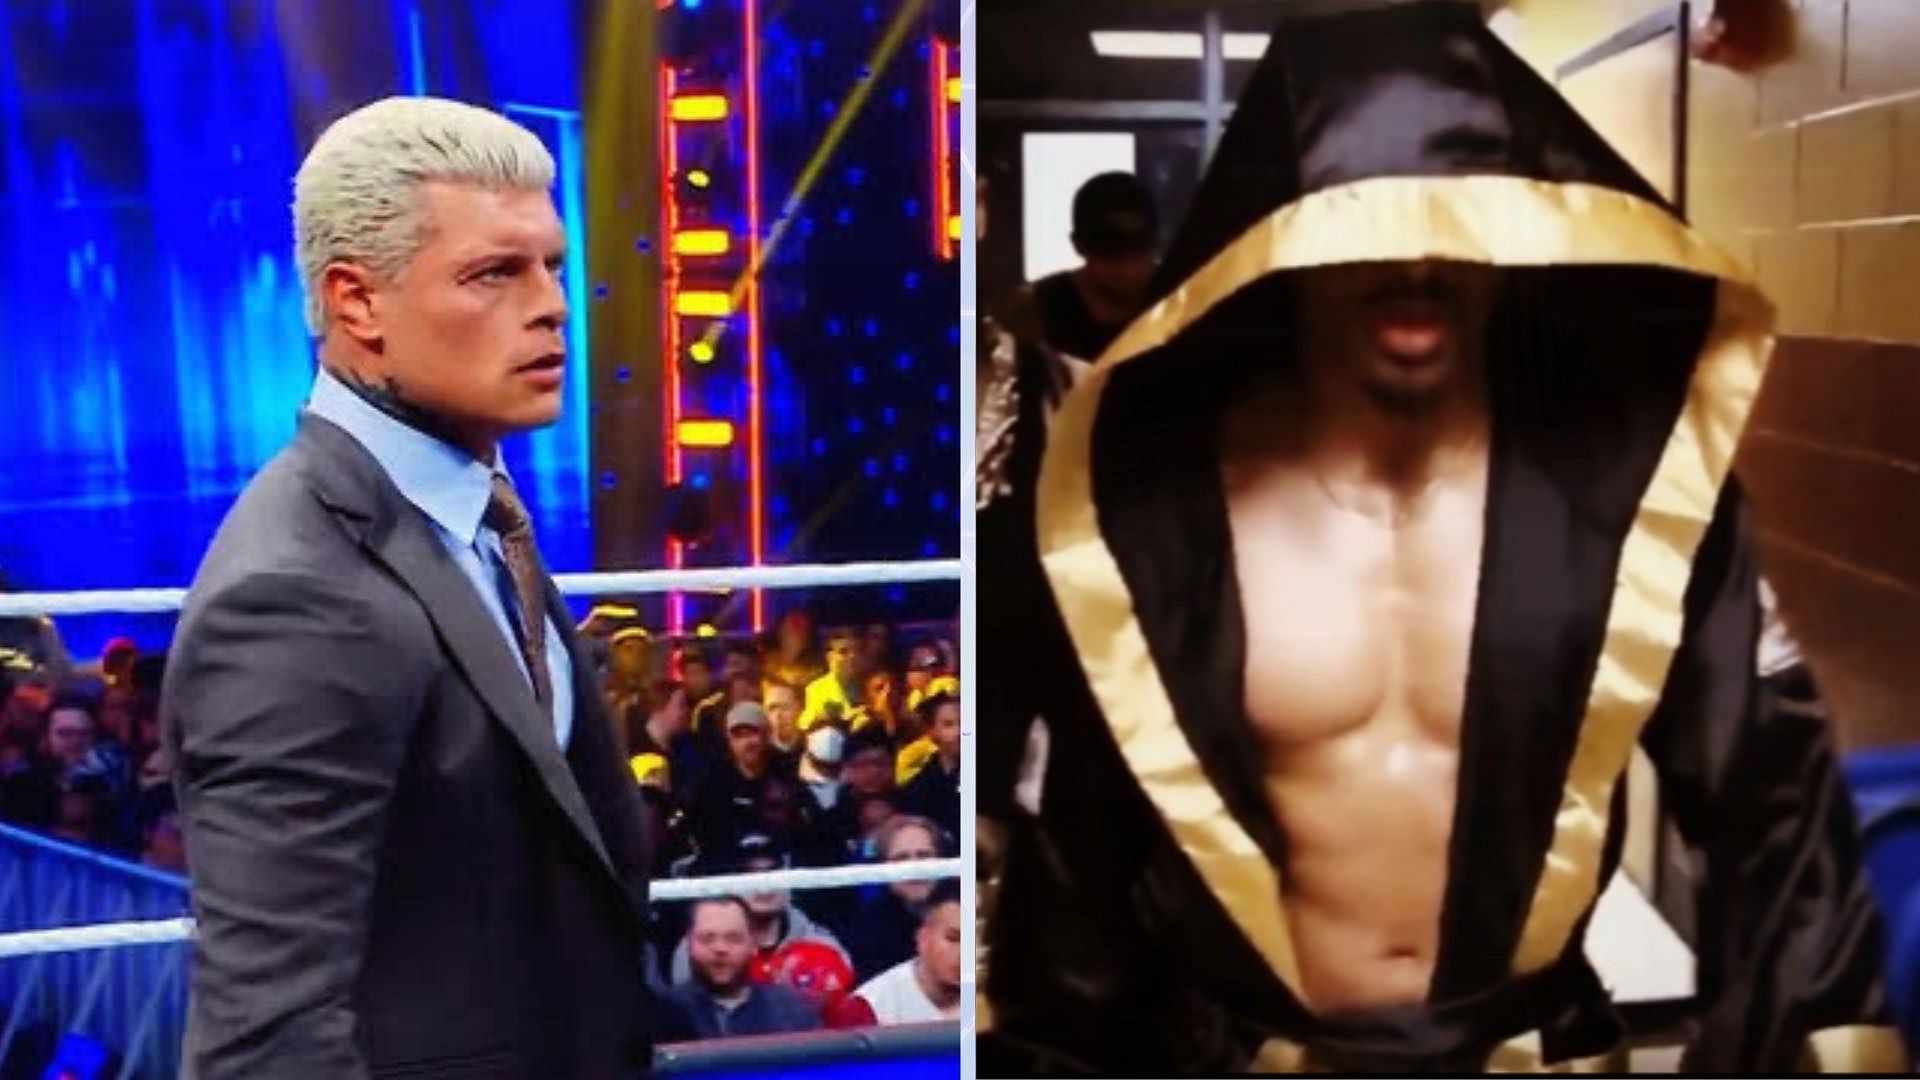 Cody Rhodes is the current WWE Universal Champion [Image credits: stars